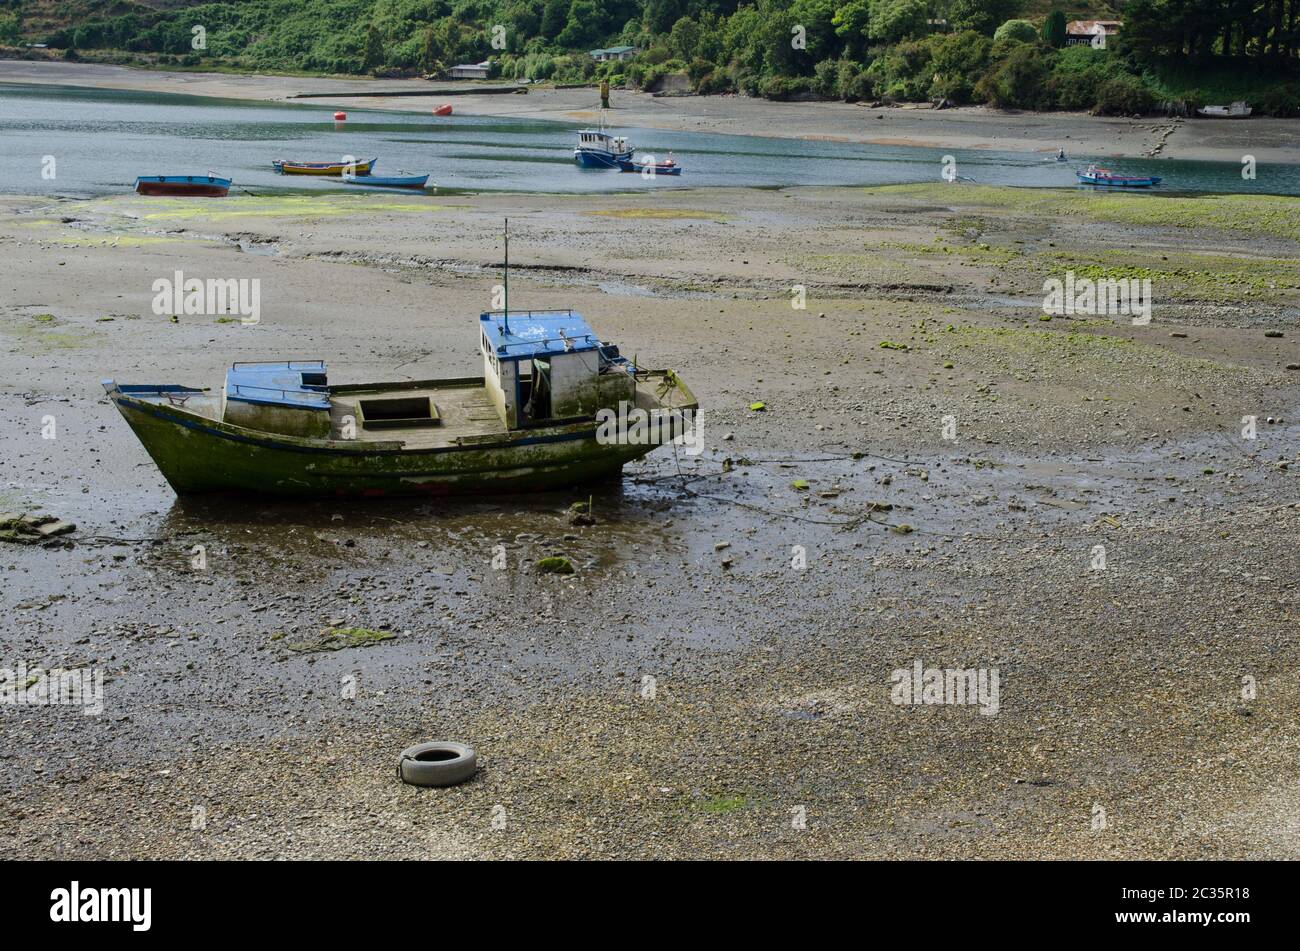 Fishing boat stranded in the coast. Angelmo. Puerto Montt. Los Lagos Region. Chile. Stock Photo